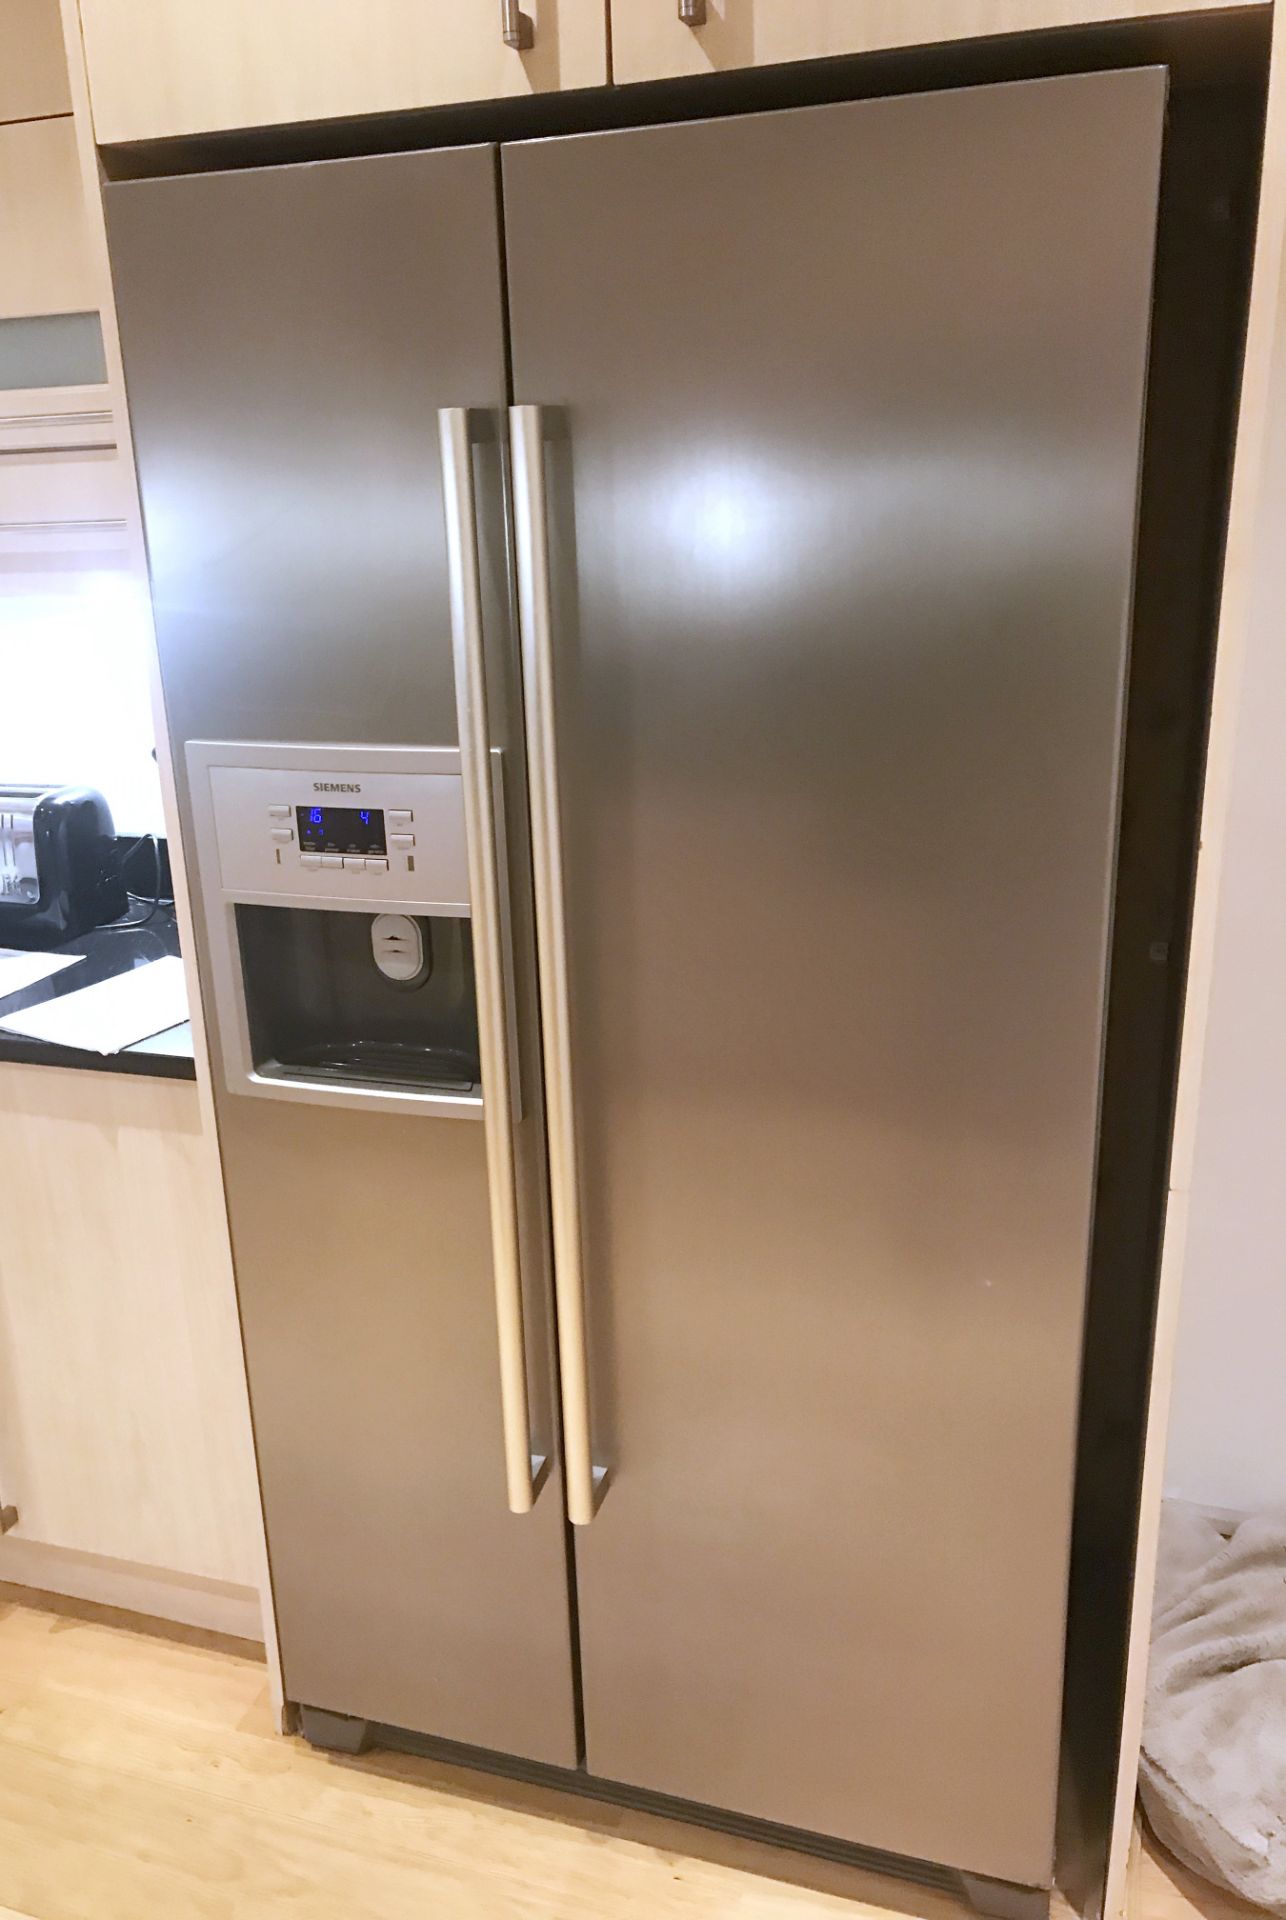 1 x Siemens American Style Fridge Freezer in Silver - Features Ice and Water Dispenser, Digital